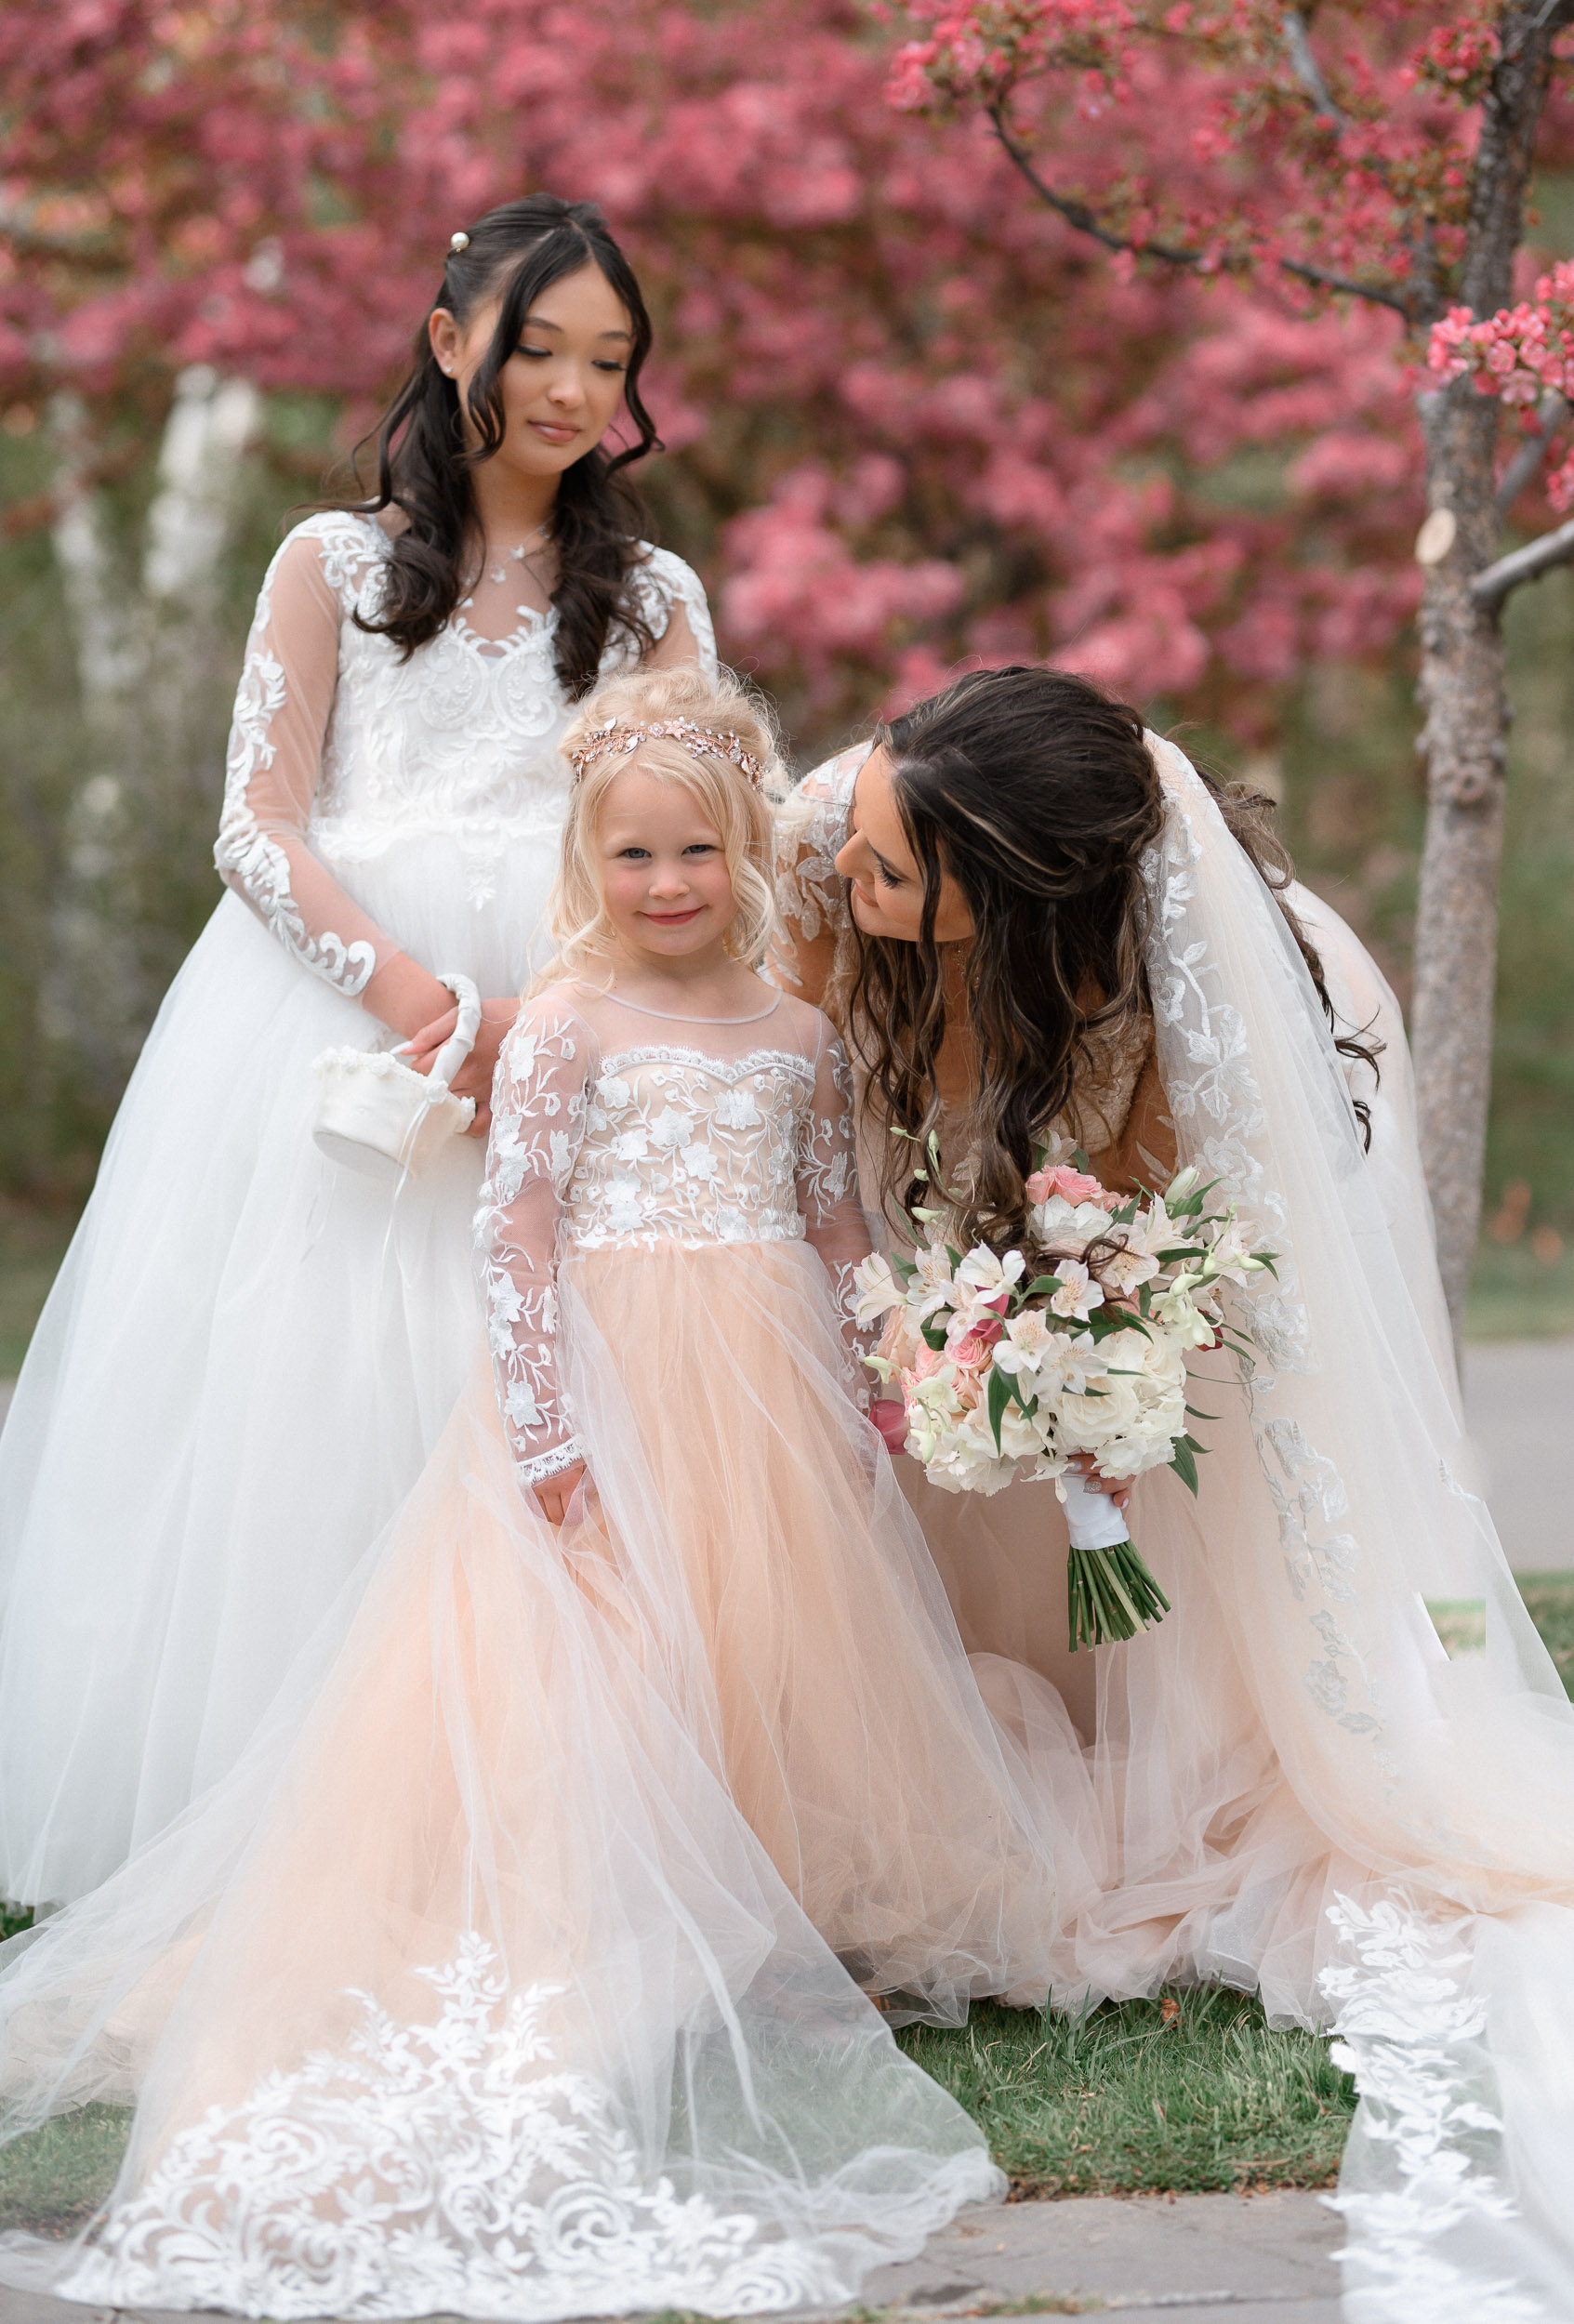 Three bridesmaids and a little girl in wedding dresses.